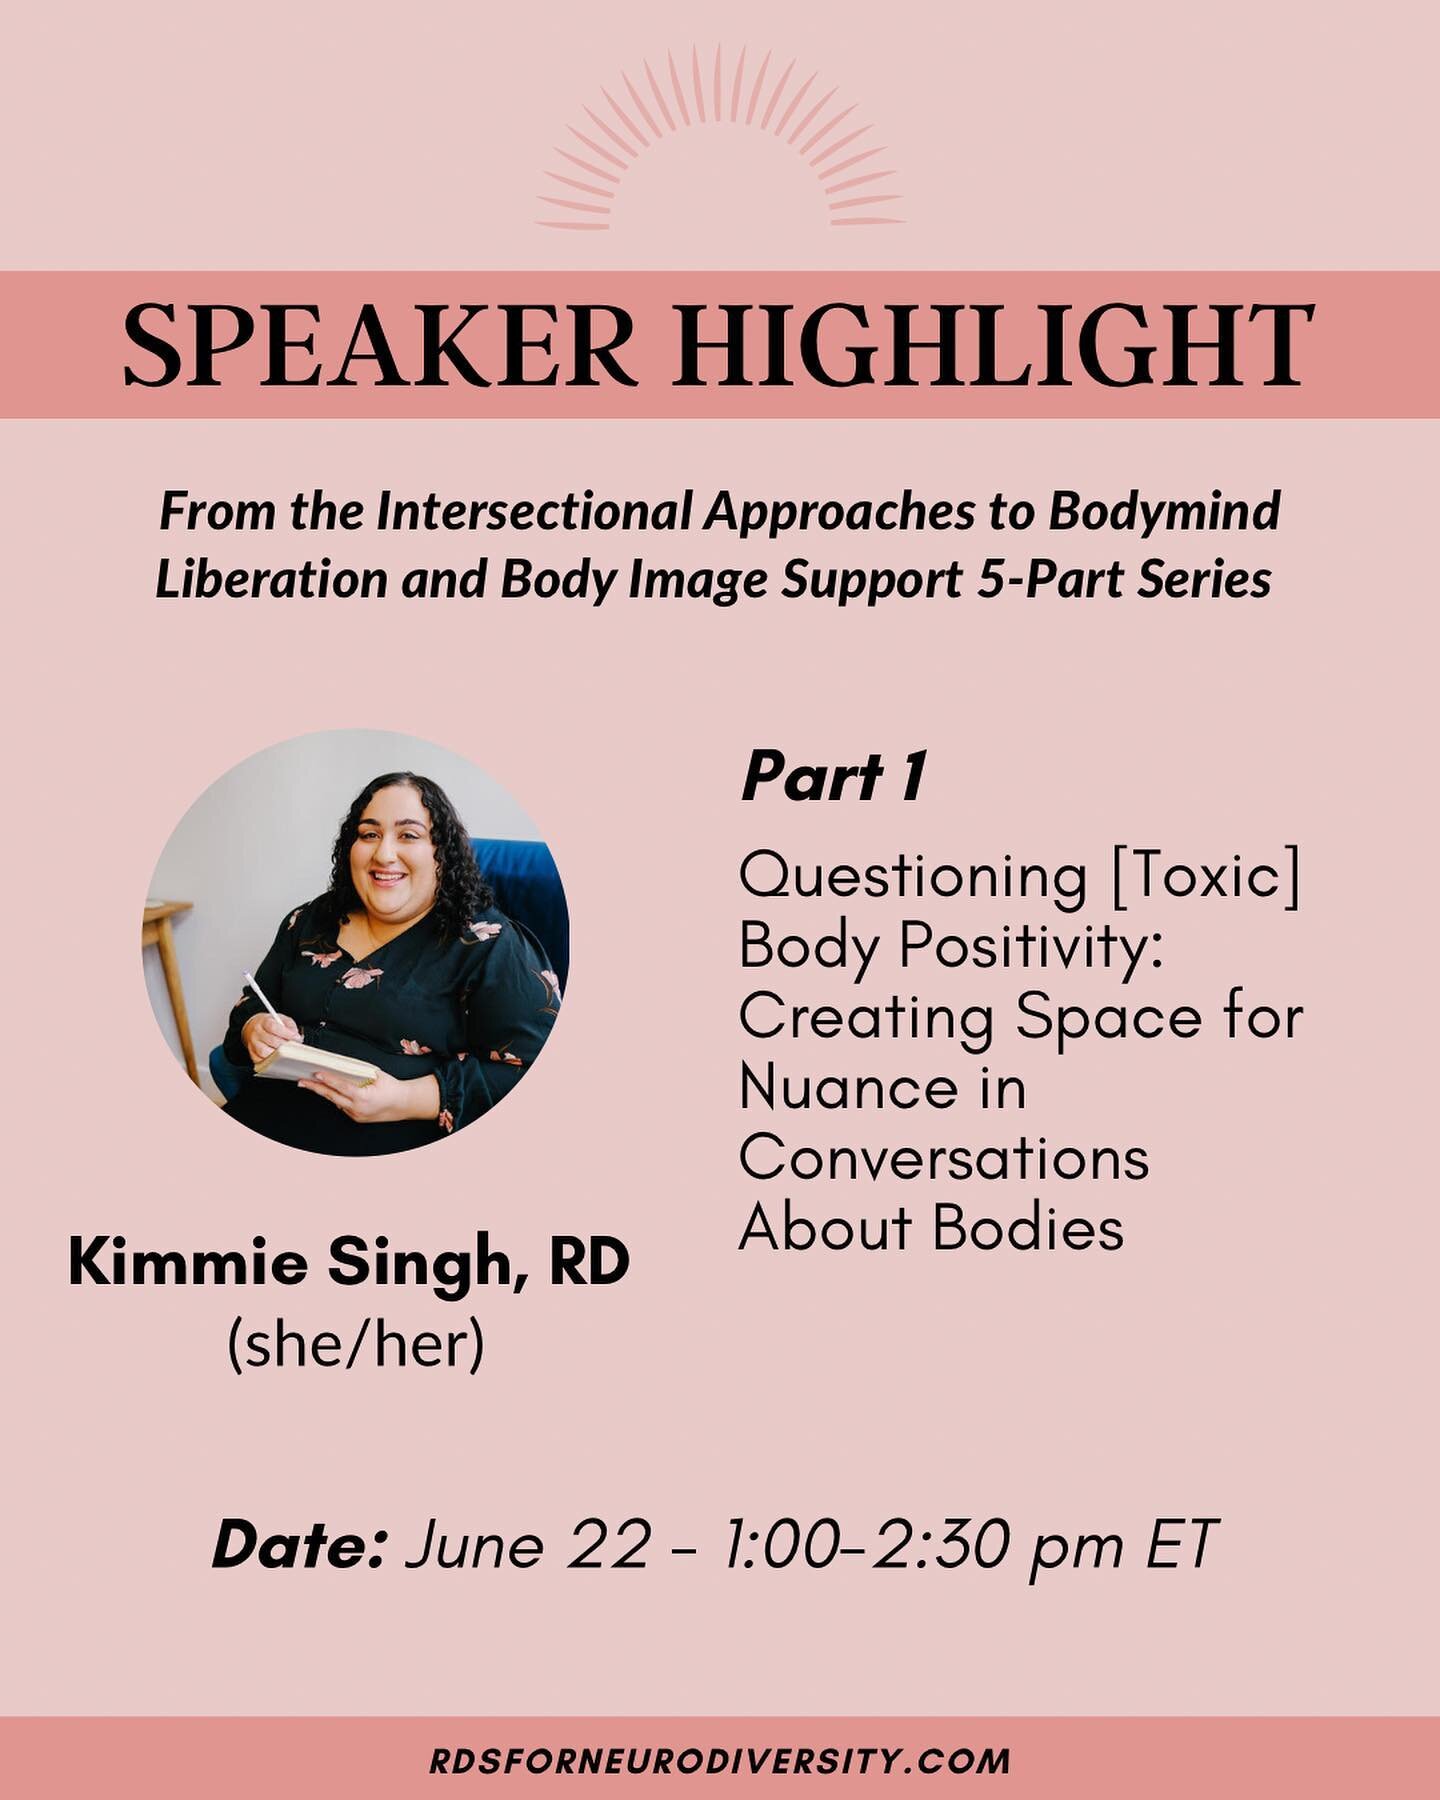 Presentation title: ⁣
Part 1. Questioning [Toxic] Body Positivity: Creating Space for Nuance in Conversations About Bodies. ⁣
⁣
Presenter: Kimmie Singh @bodyhonornutrition 
⁣
Kimmie Singh is a self-proclaimed fat Registered Dietitian based in New Yor